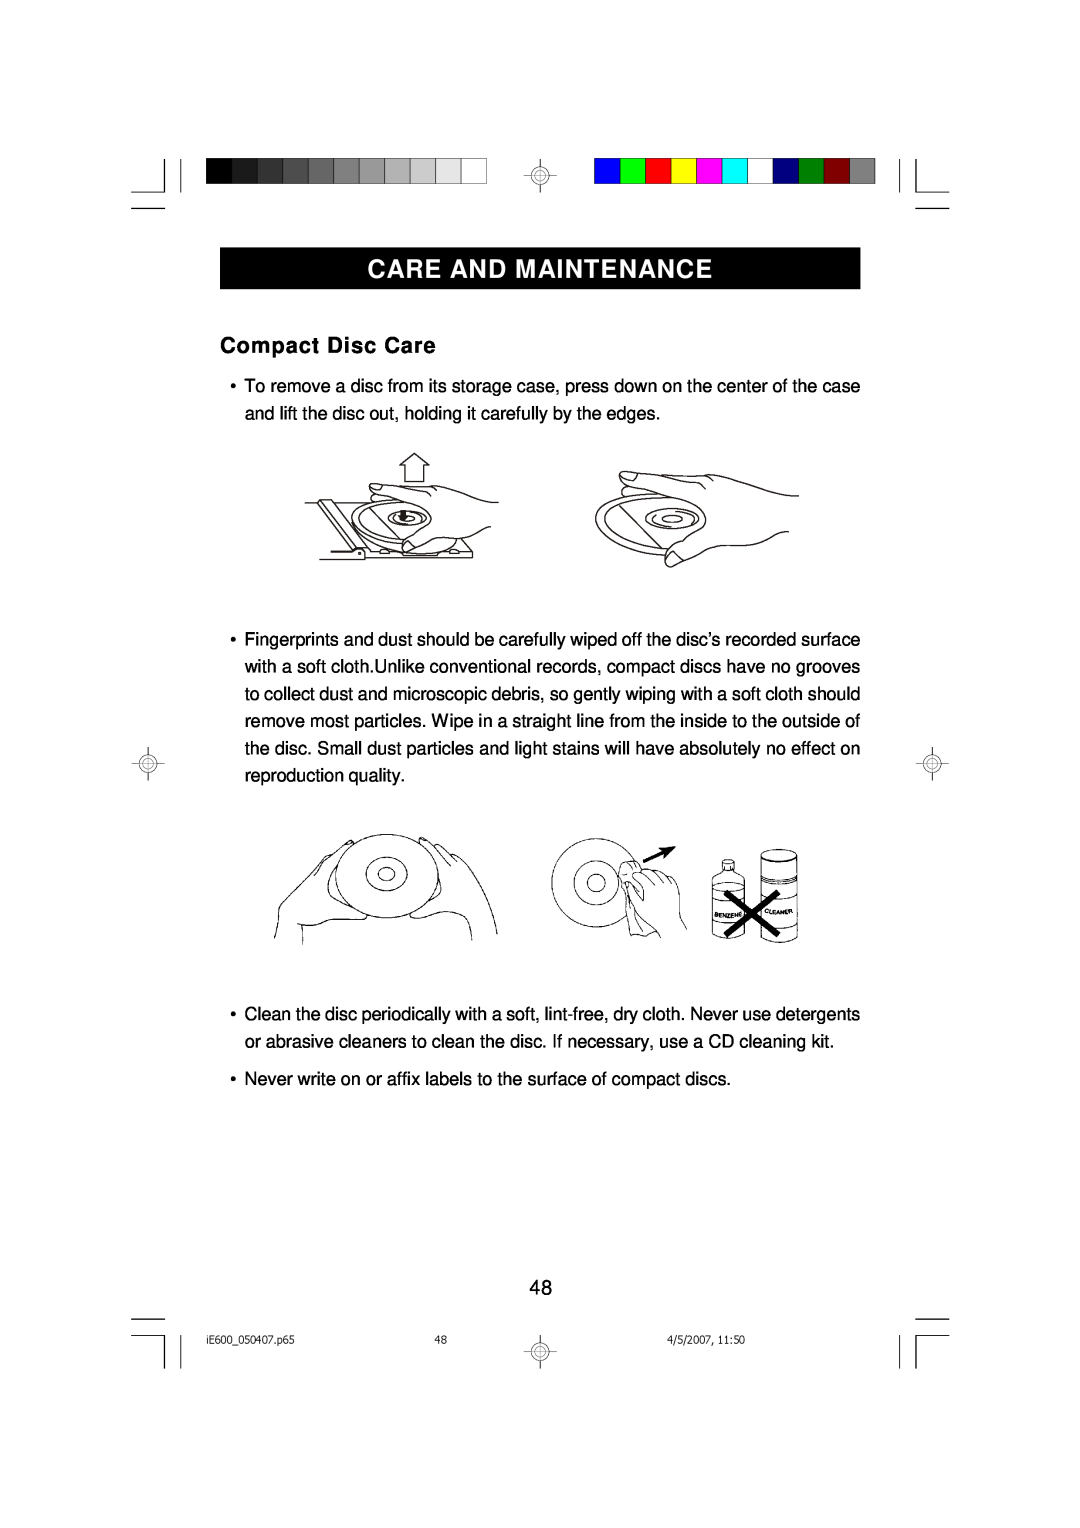 Emerson iE600 owner manual Care And Maintenance, Compact Disc Care 